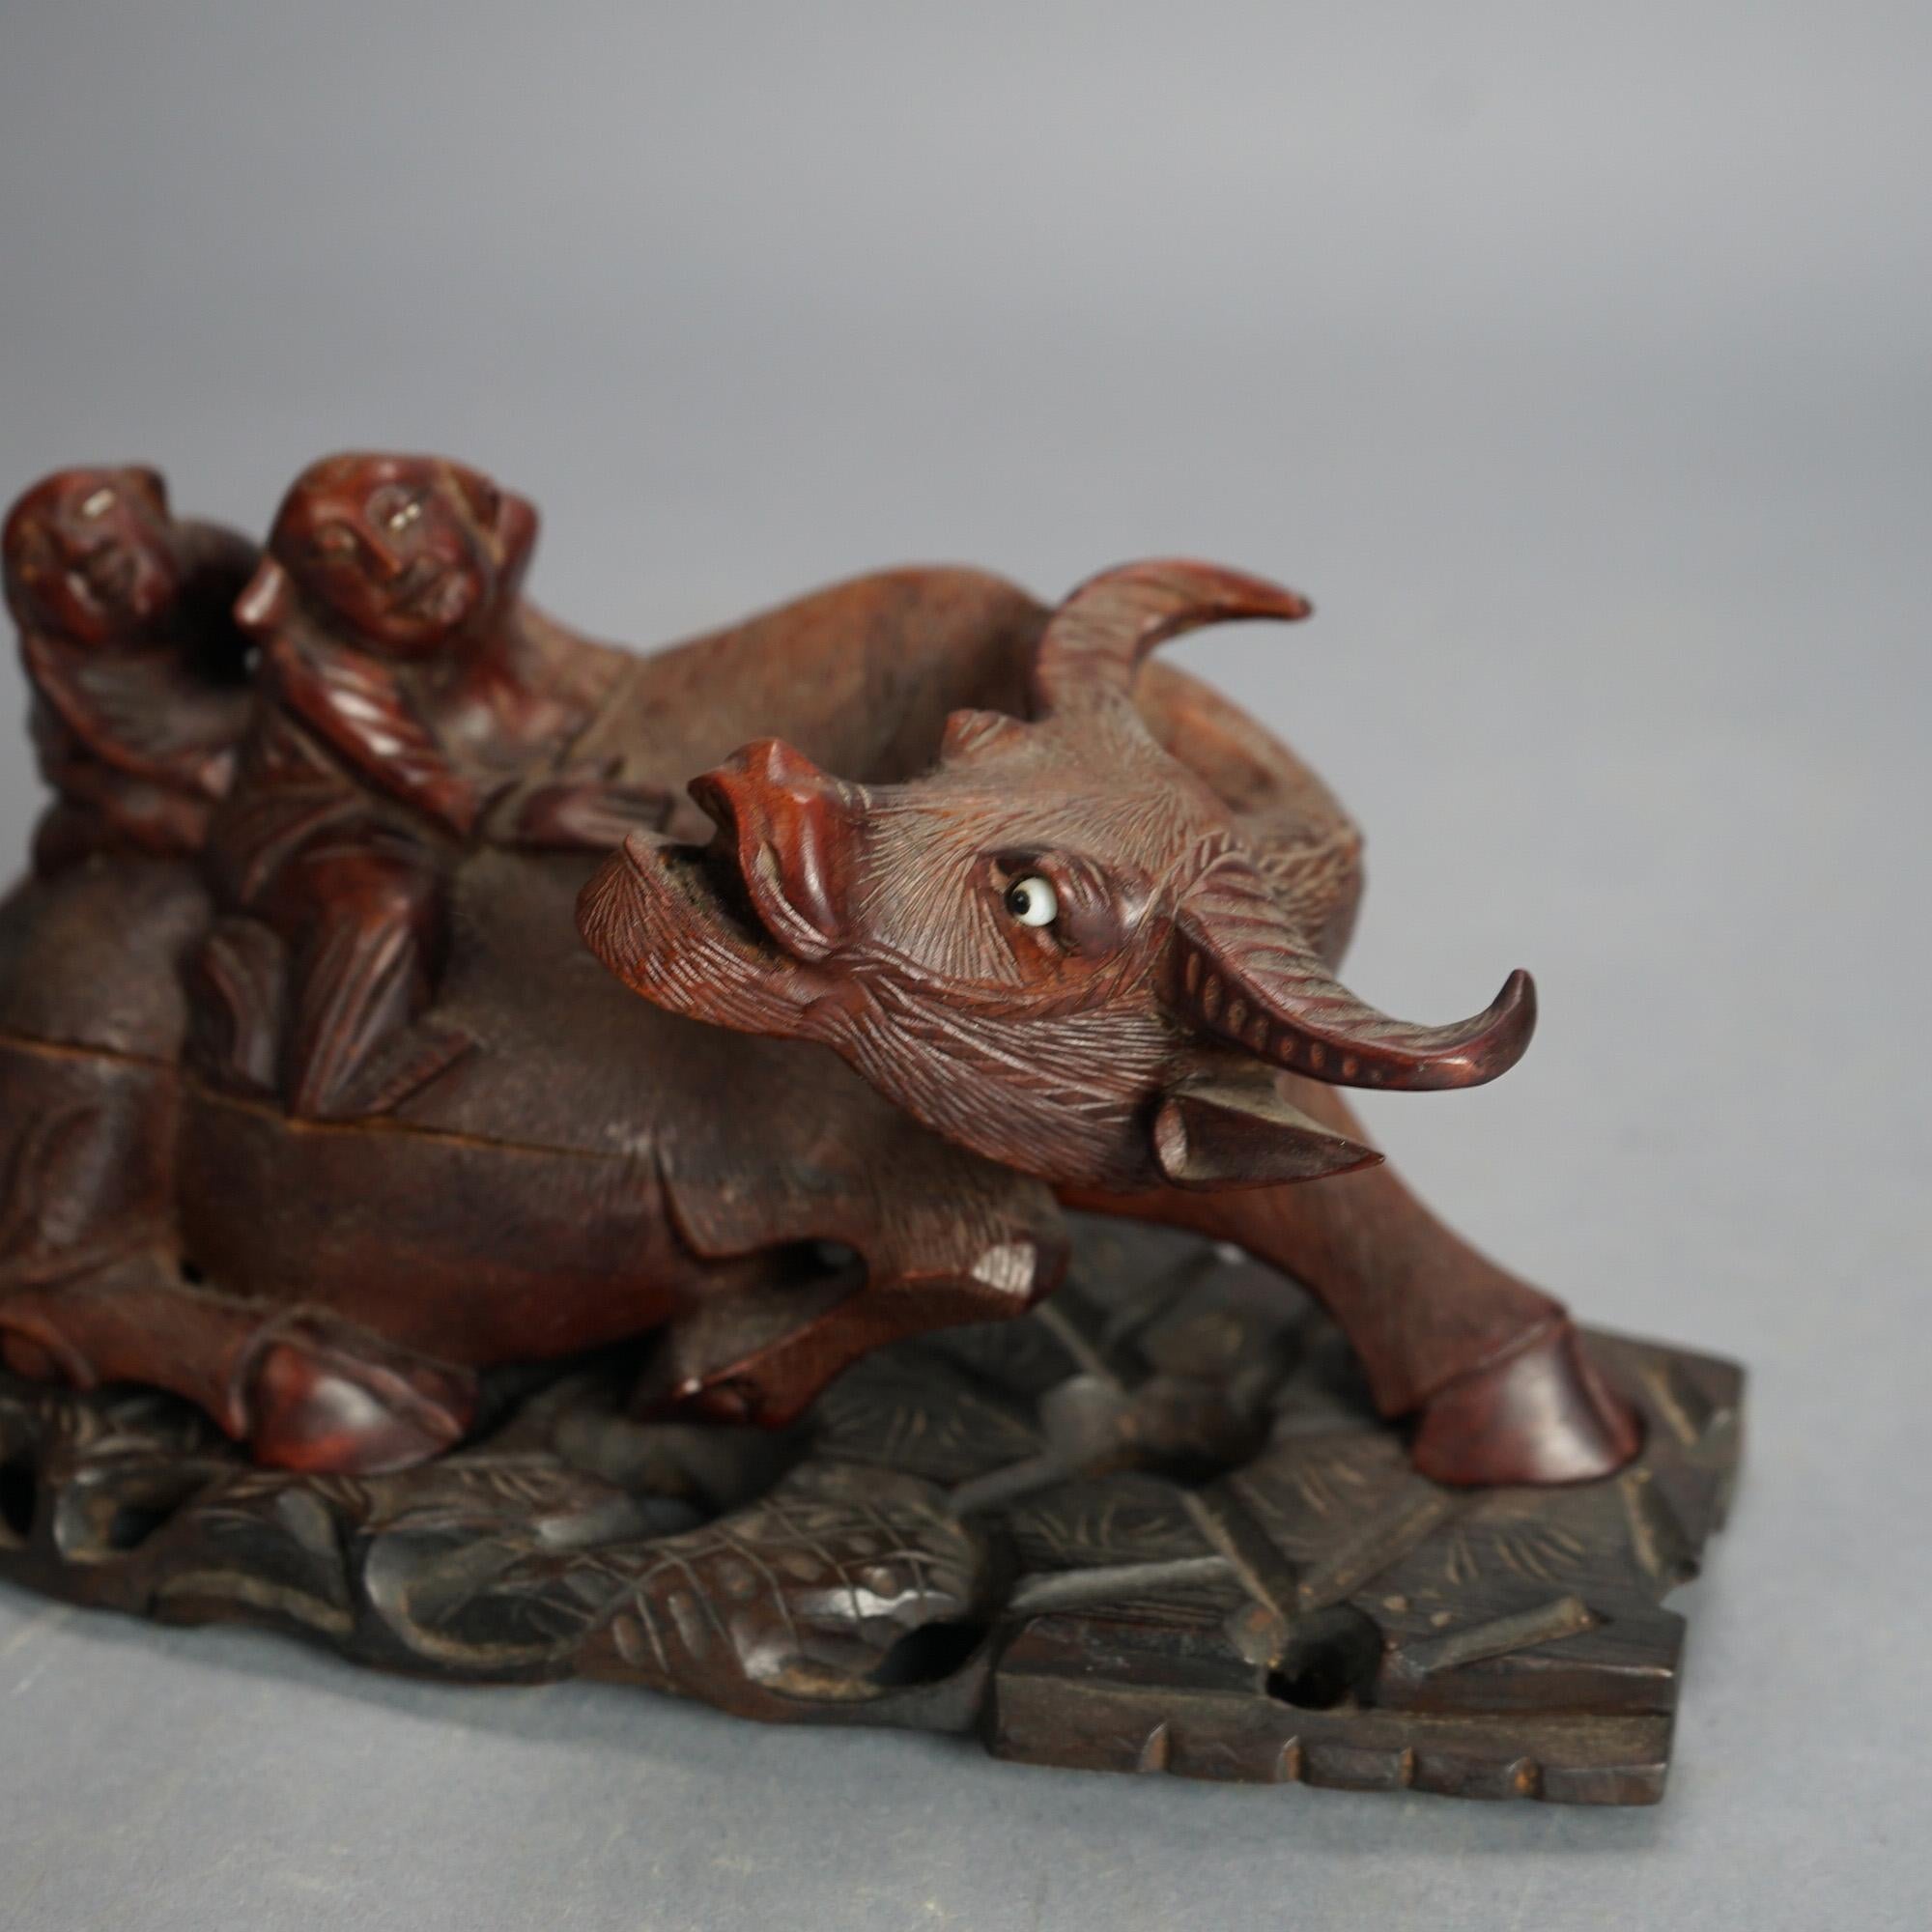 Antique Chinese Carved Wood Sculpture of Water Buffalo with Figures C1920

Measures - 5.5